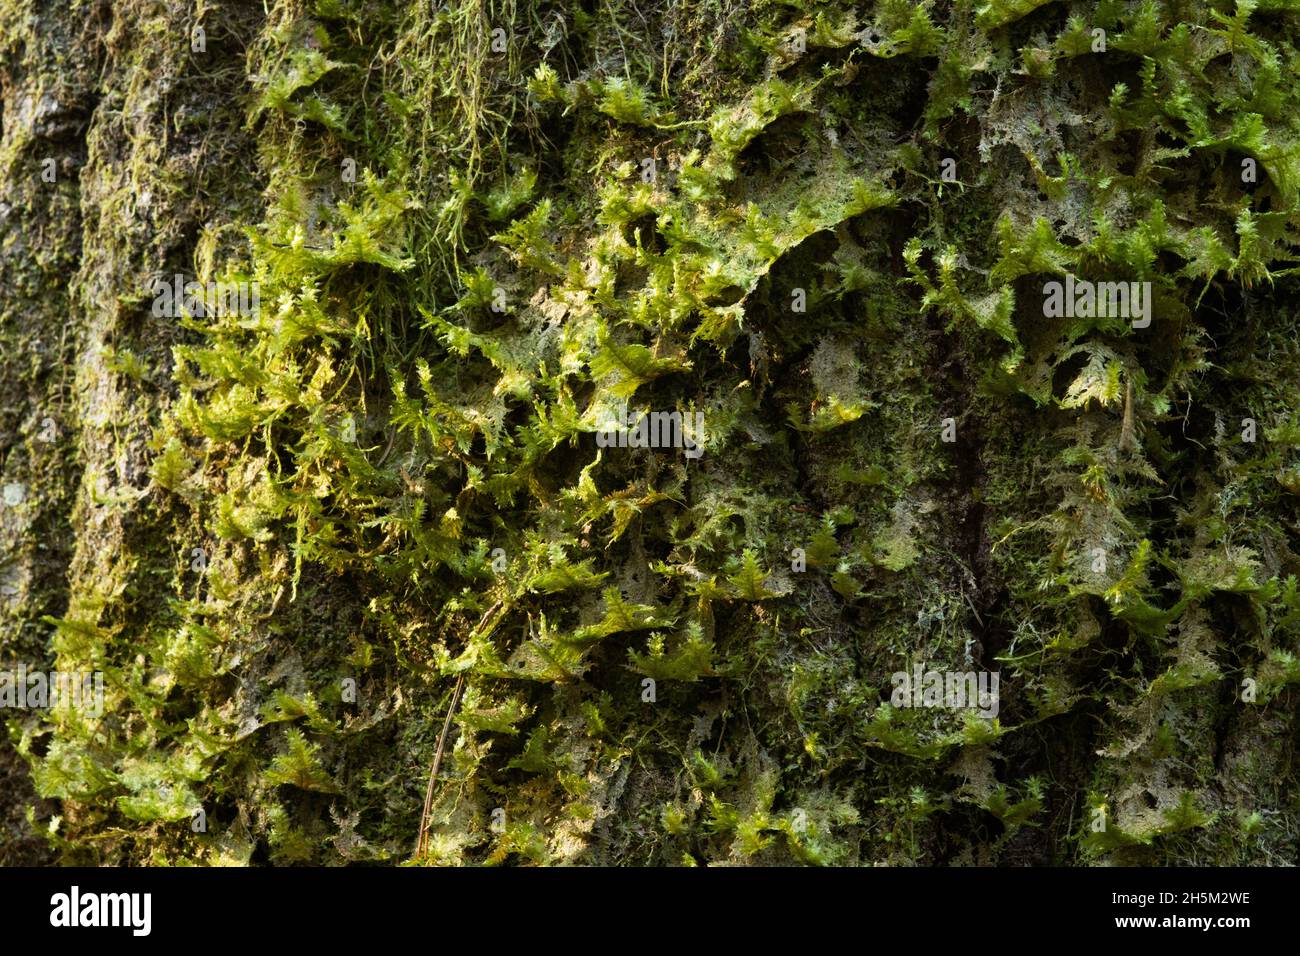 Close-up of a Neckera pennata growing on an Aspen bark in an old-growth forest. Neckera pennata is a species of moss belonging to the family Neckerace Stock Photo